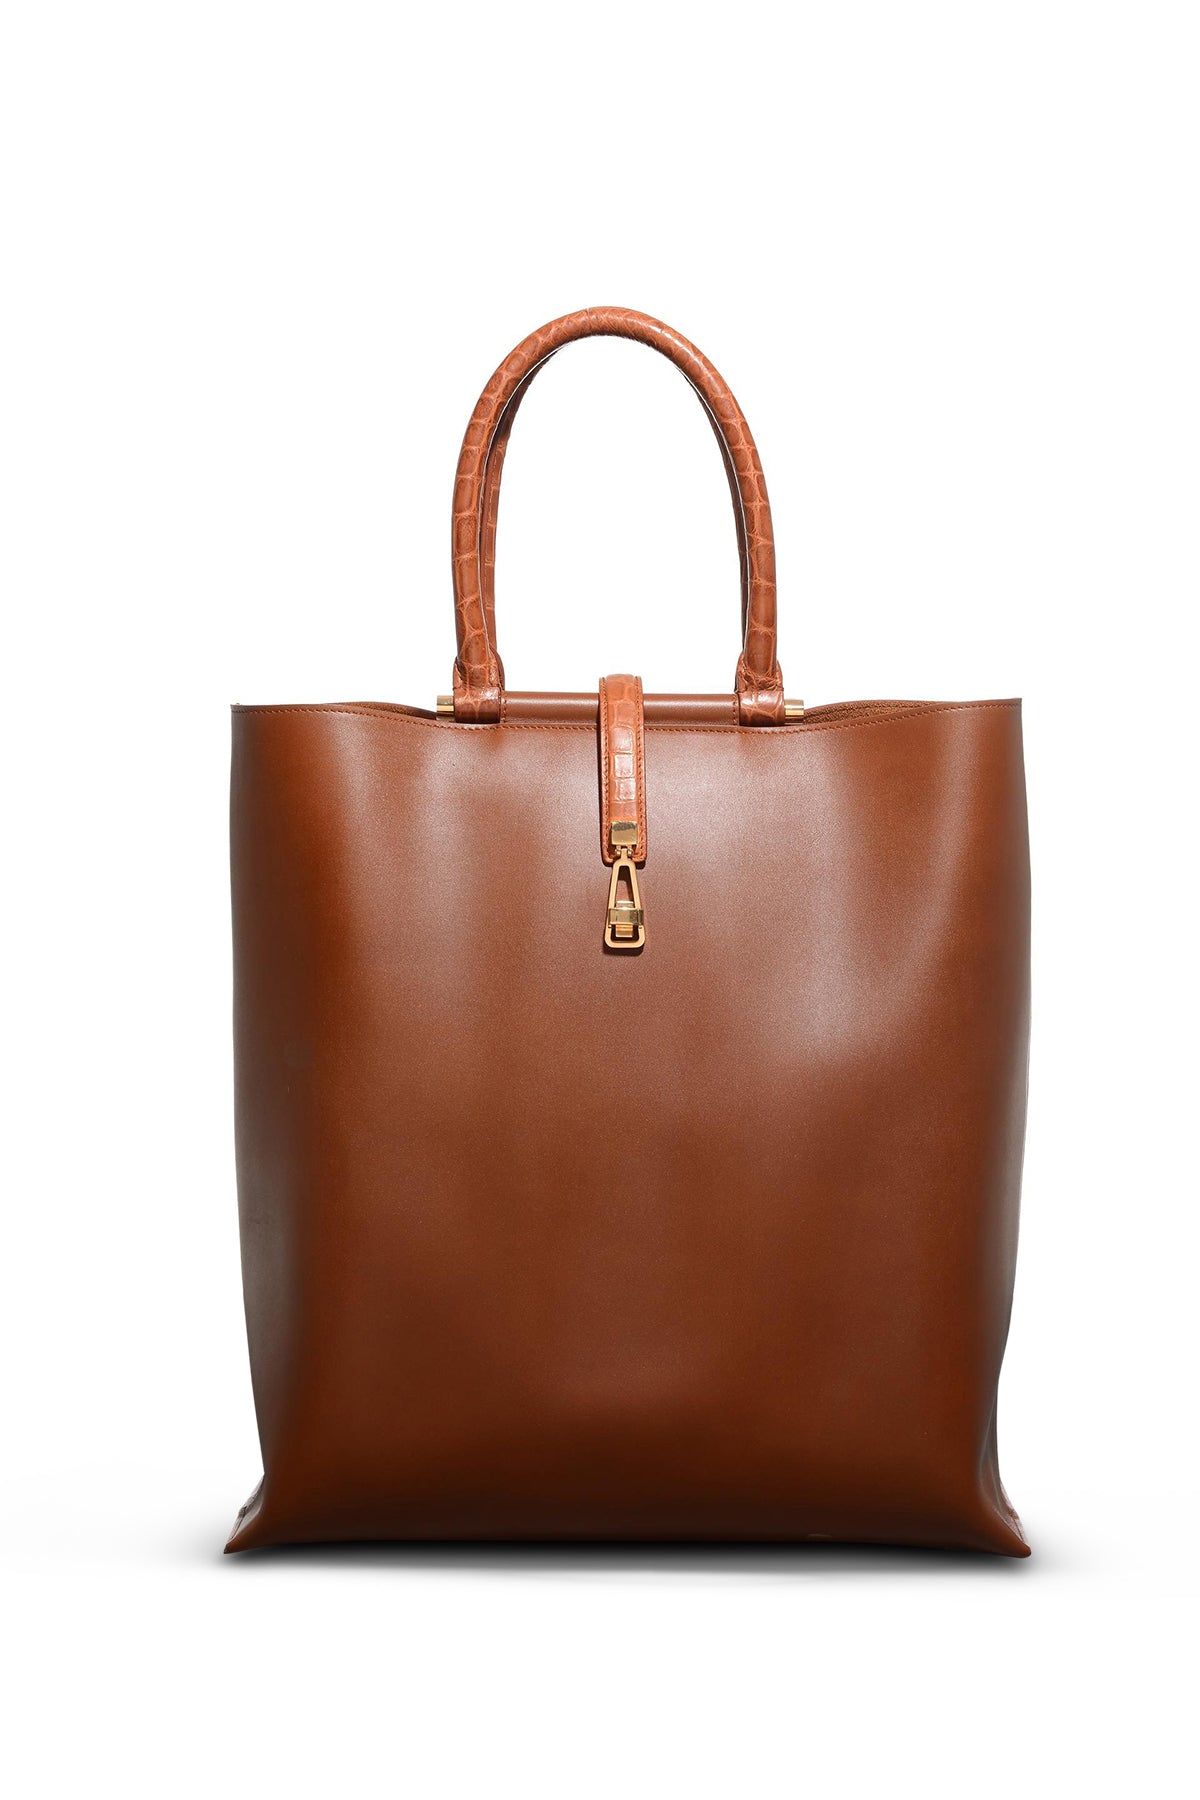 Vevers Tote Bag in Cognac Leather with Crocodile Leather Handle